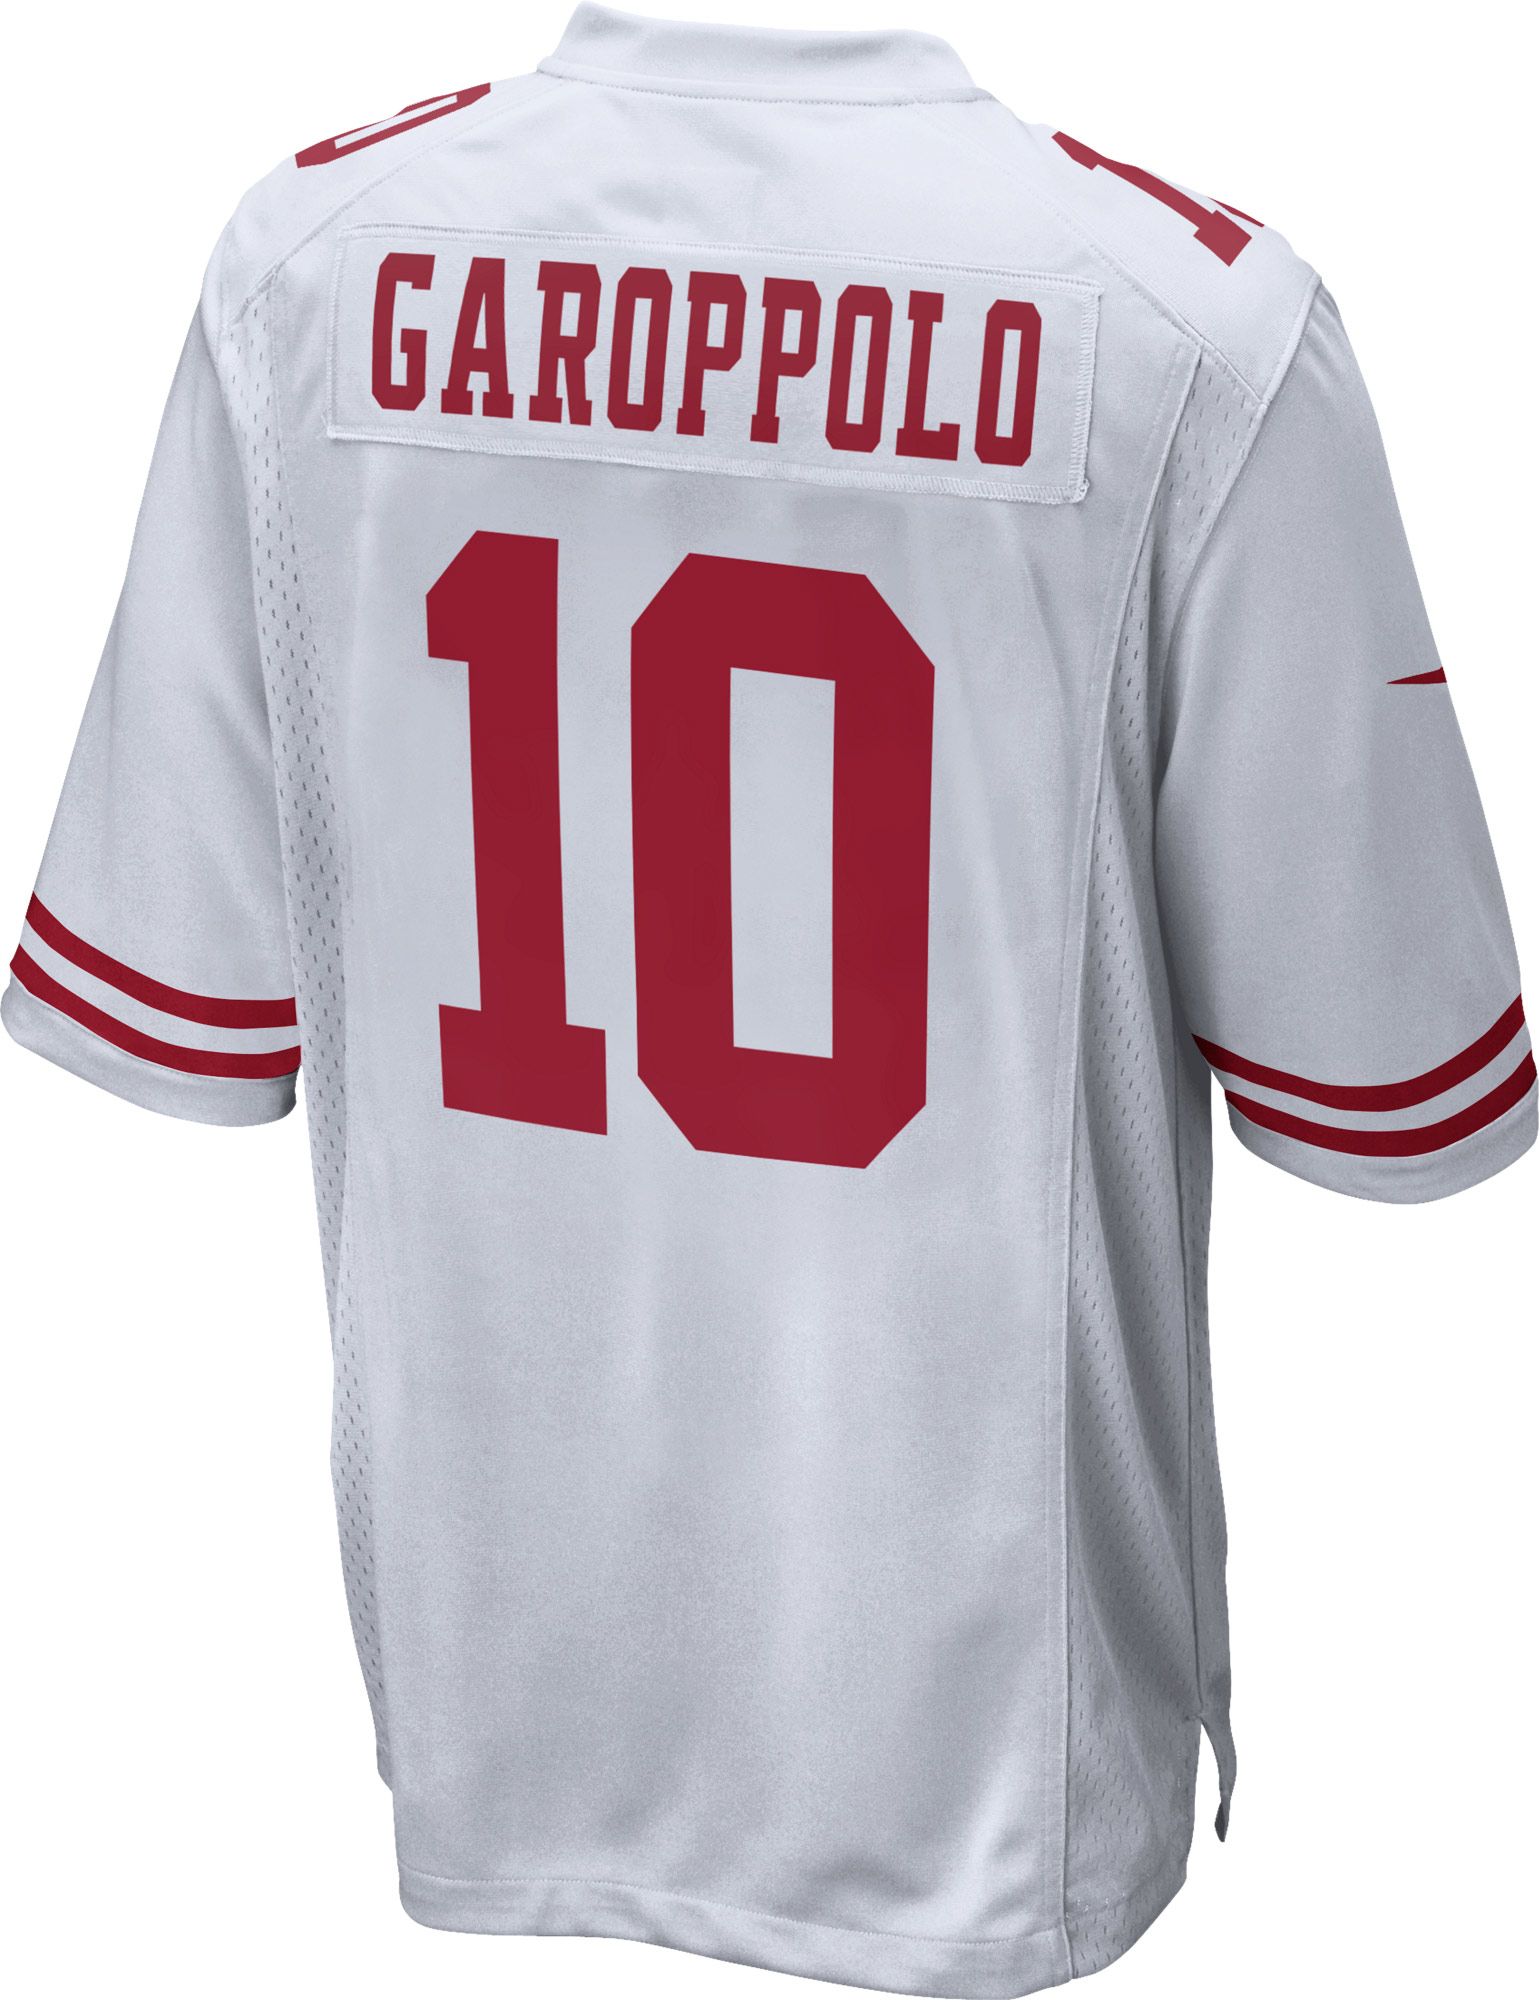 49ers number 10 jersey